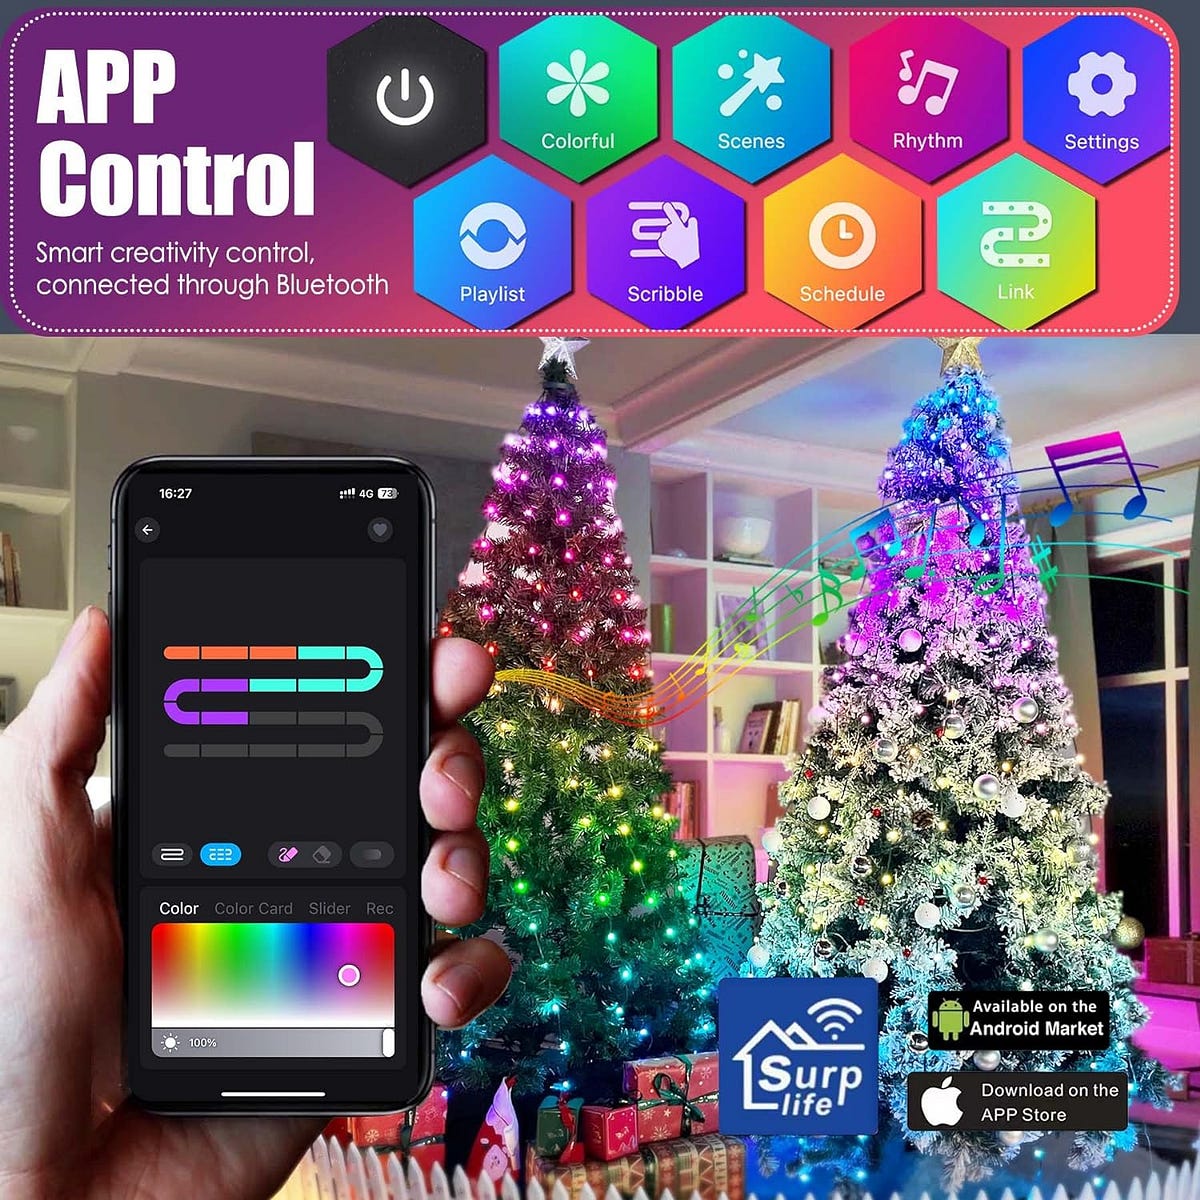 The Benefits of Surplife APP-Controlled LED Lights | by Magic Home | Medium